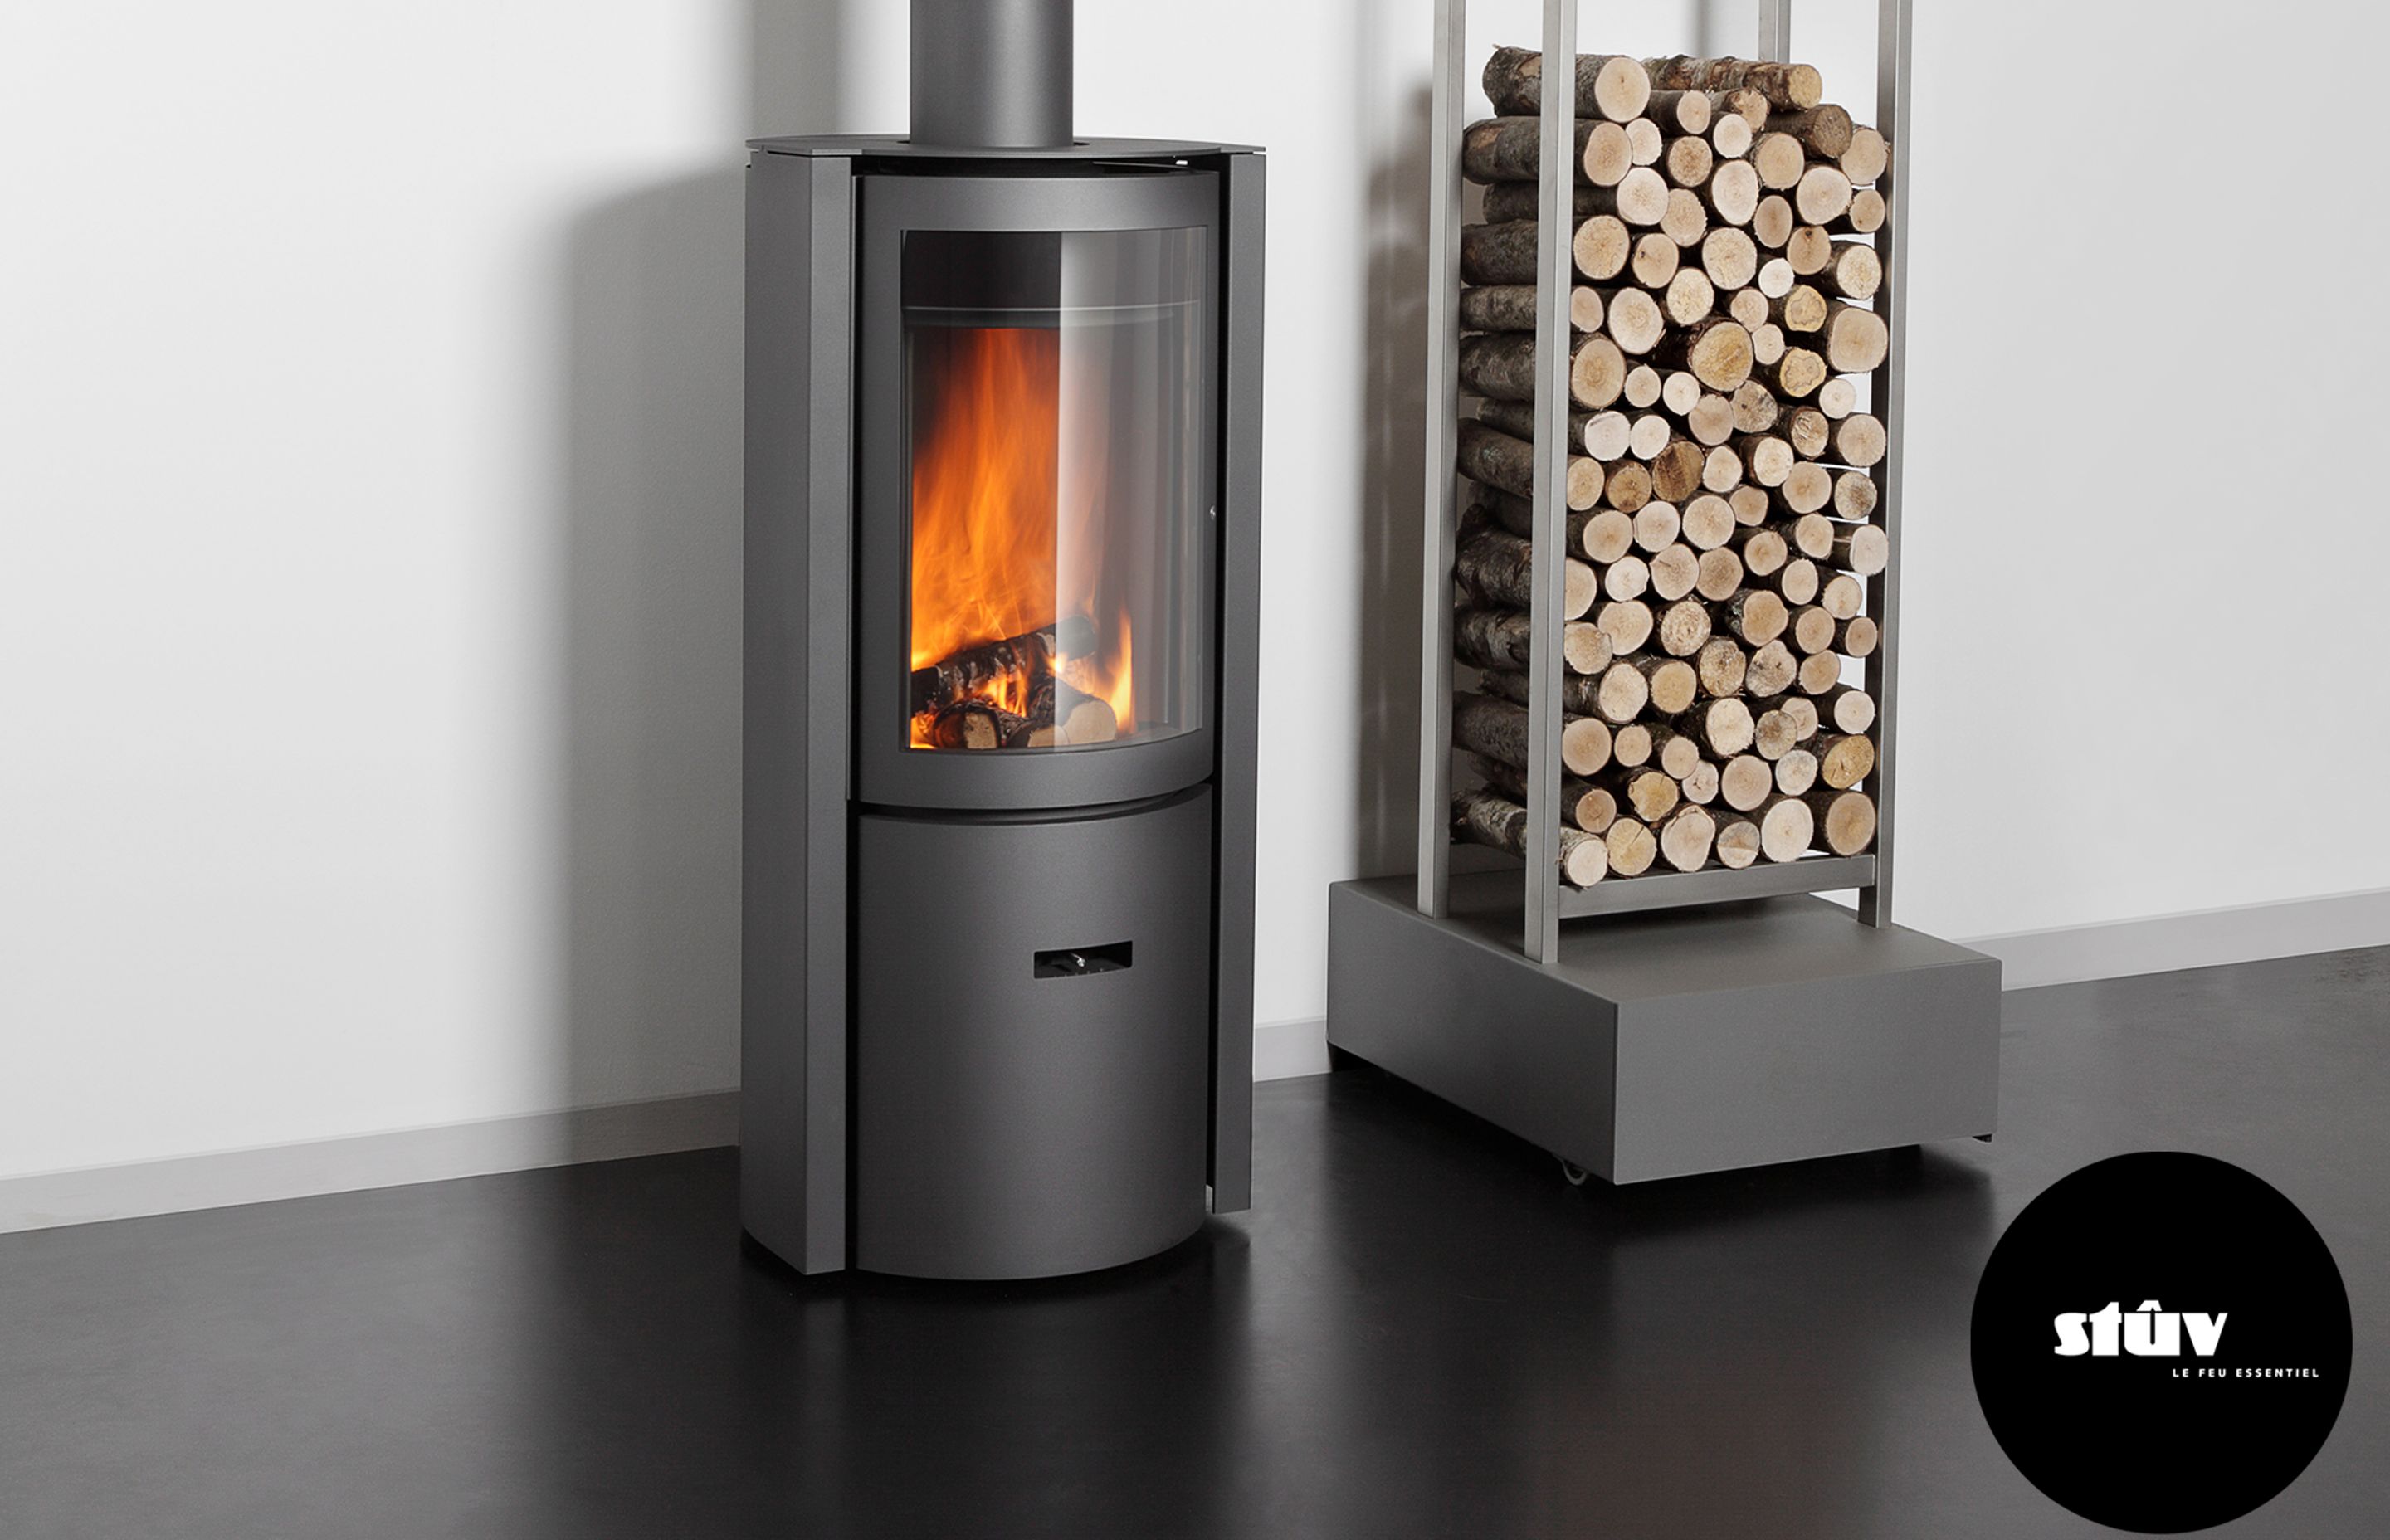 The Stûv 30 Compact 'One' ensures highly efficient combustion with an adjustable output between 3kW and 9kW.